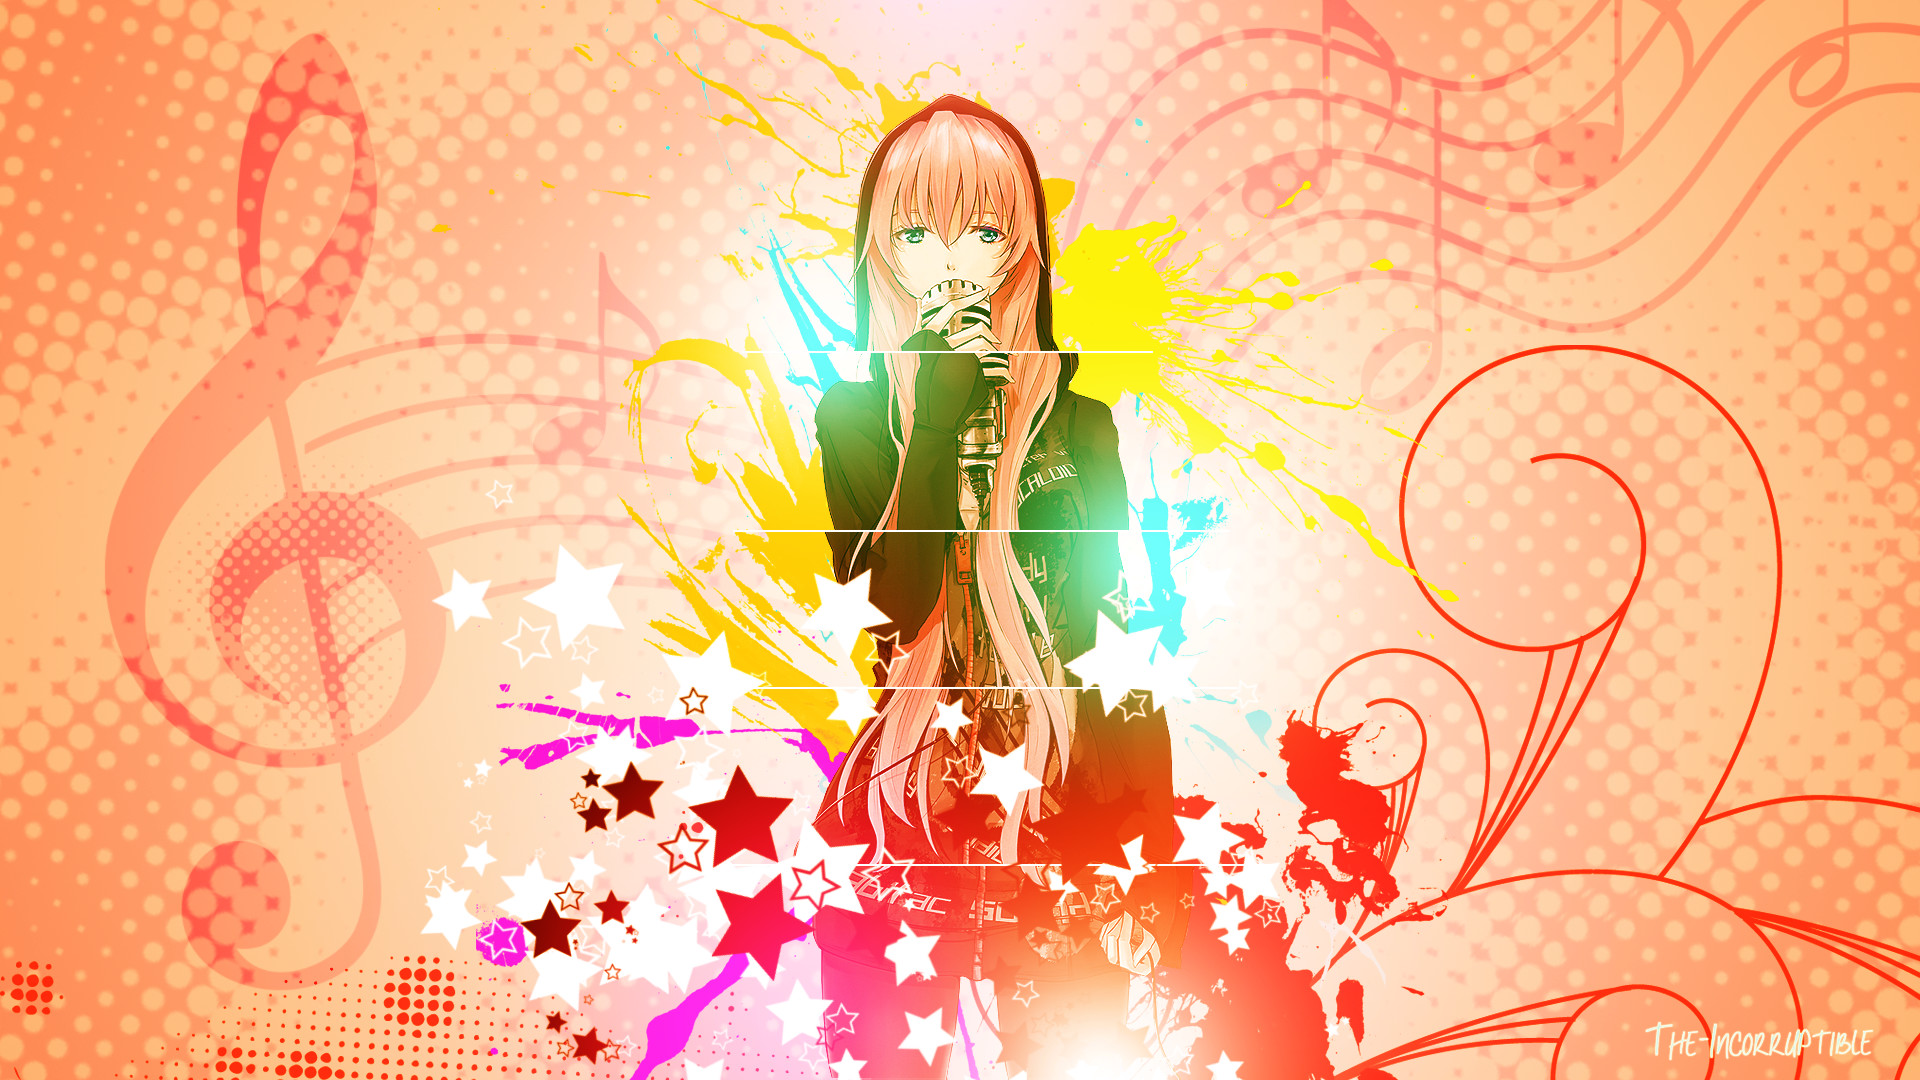 1920x1080 ... Megurine Luka Wallpaper by The-Incorruptible